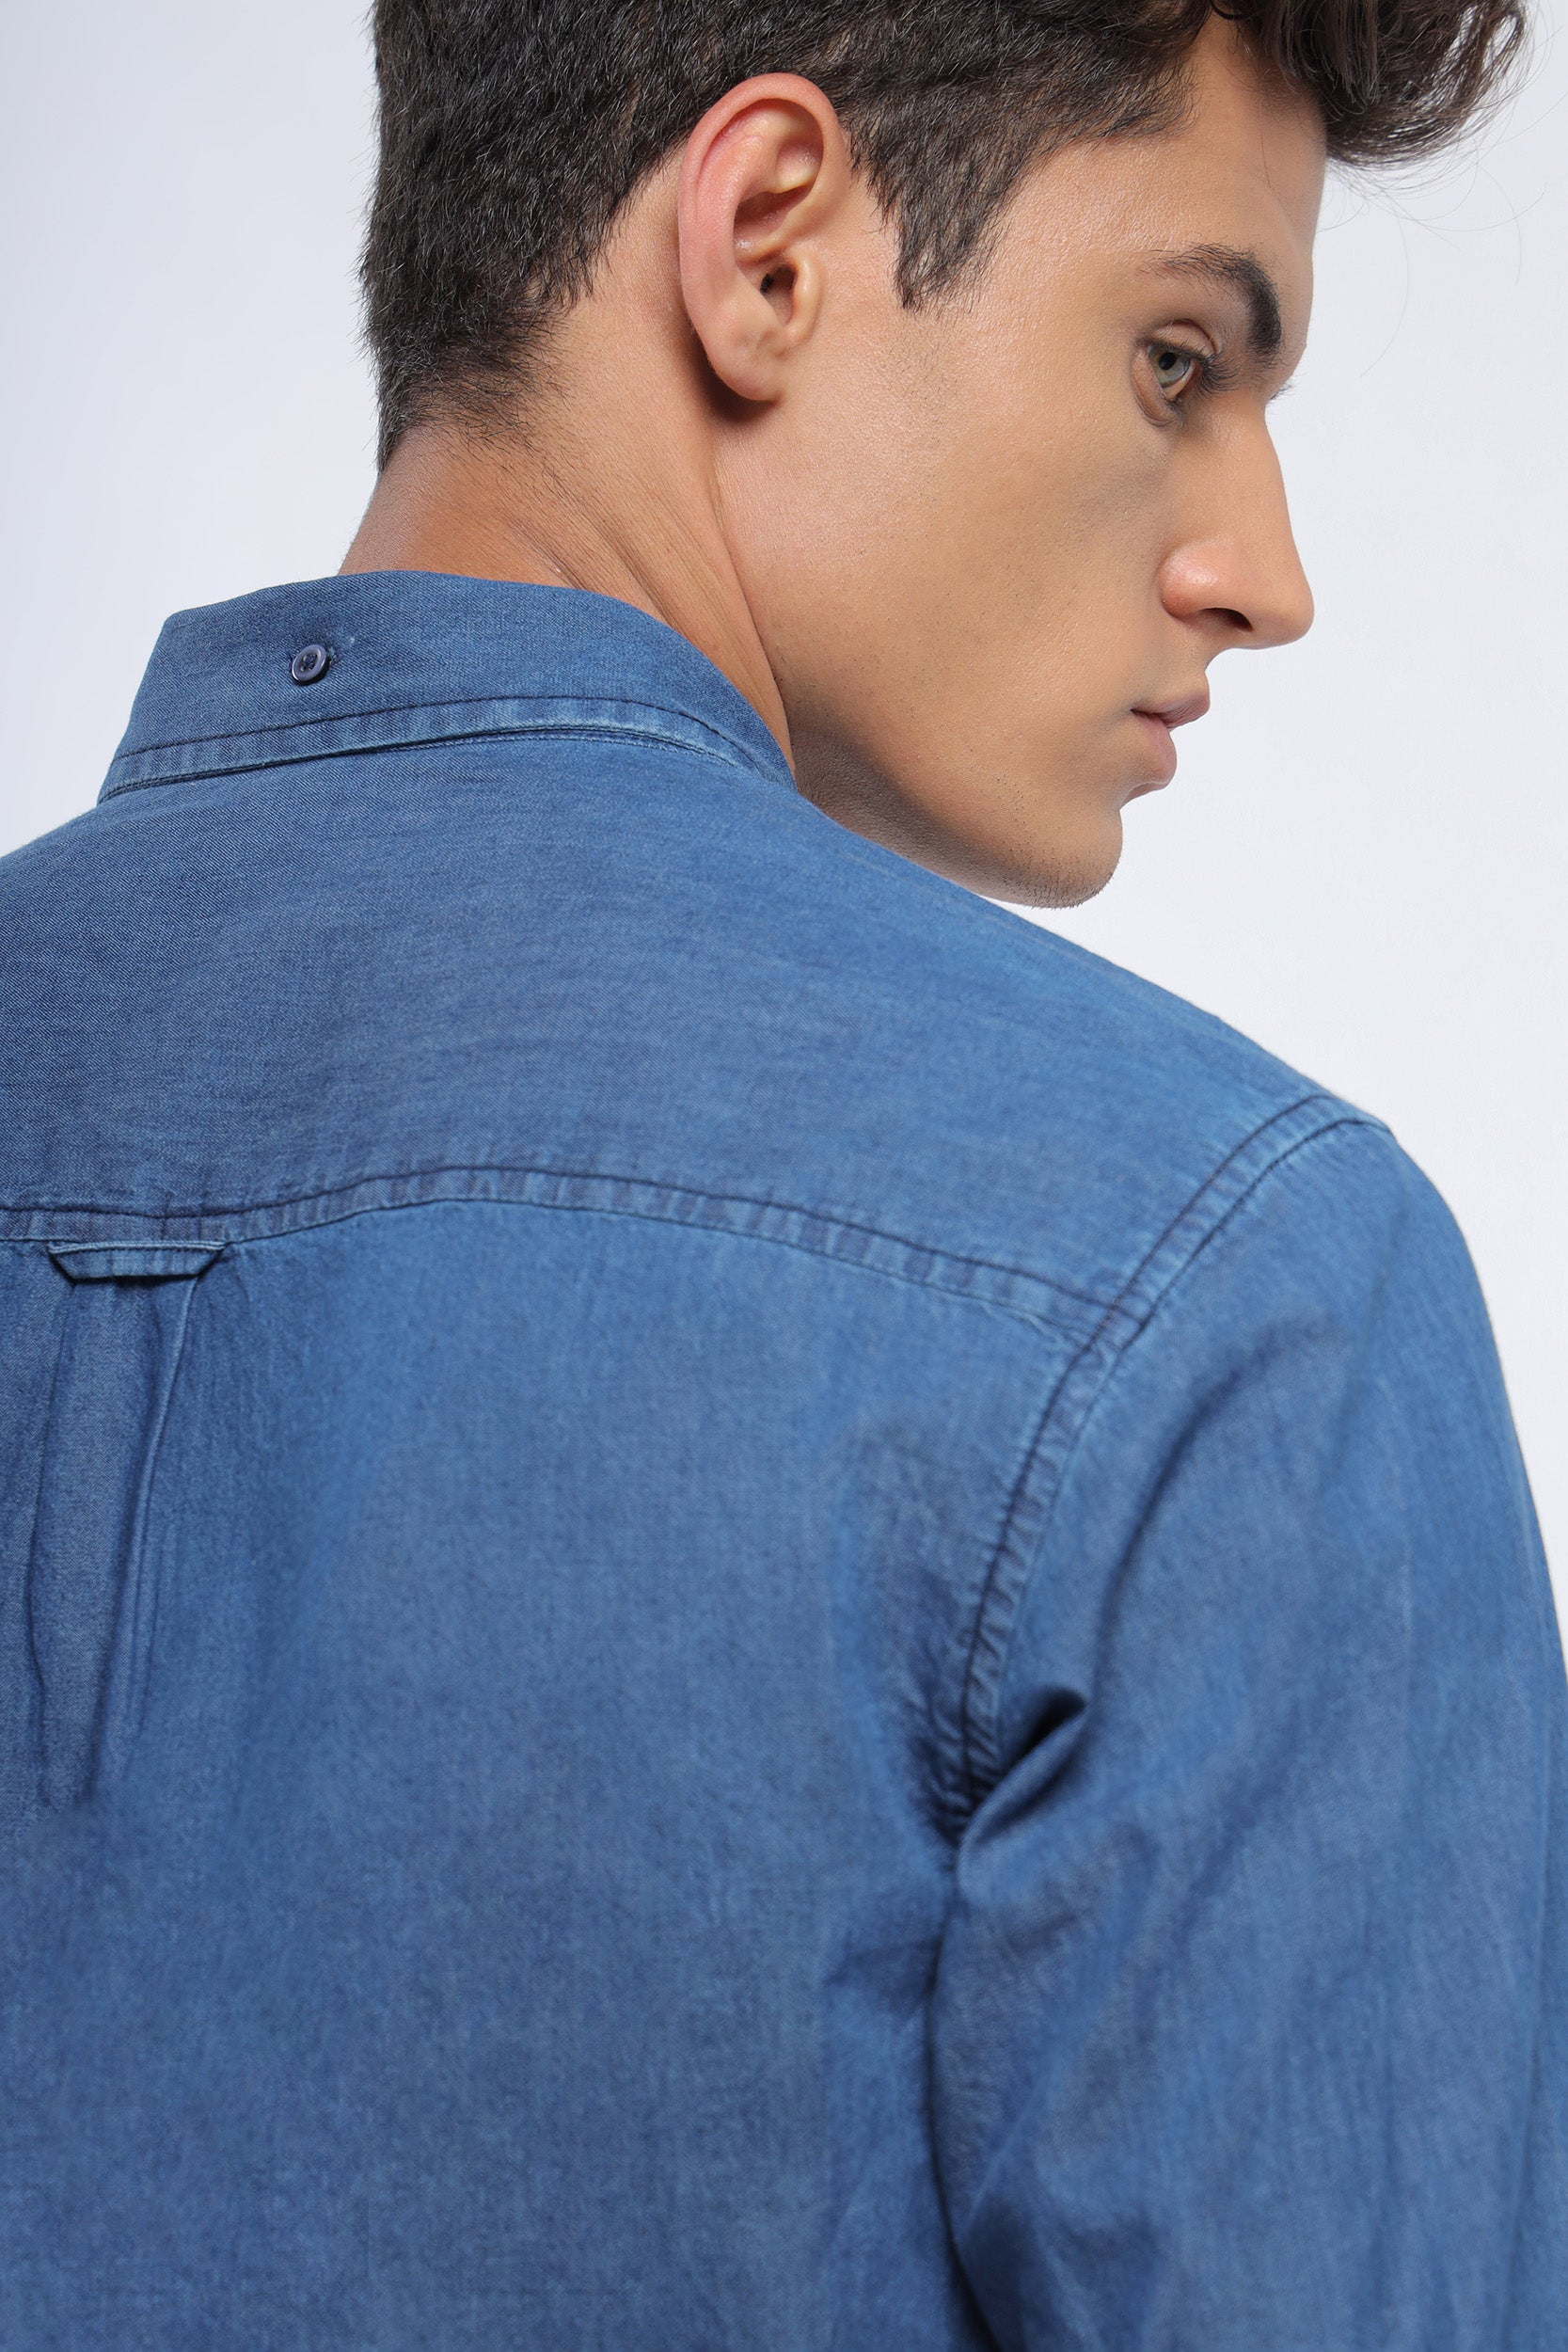 WOOYOUNGMI Denim & Jeans Shirts for Men sale - discounted price | FASHIOLA  INDIA